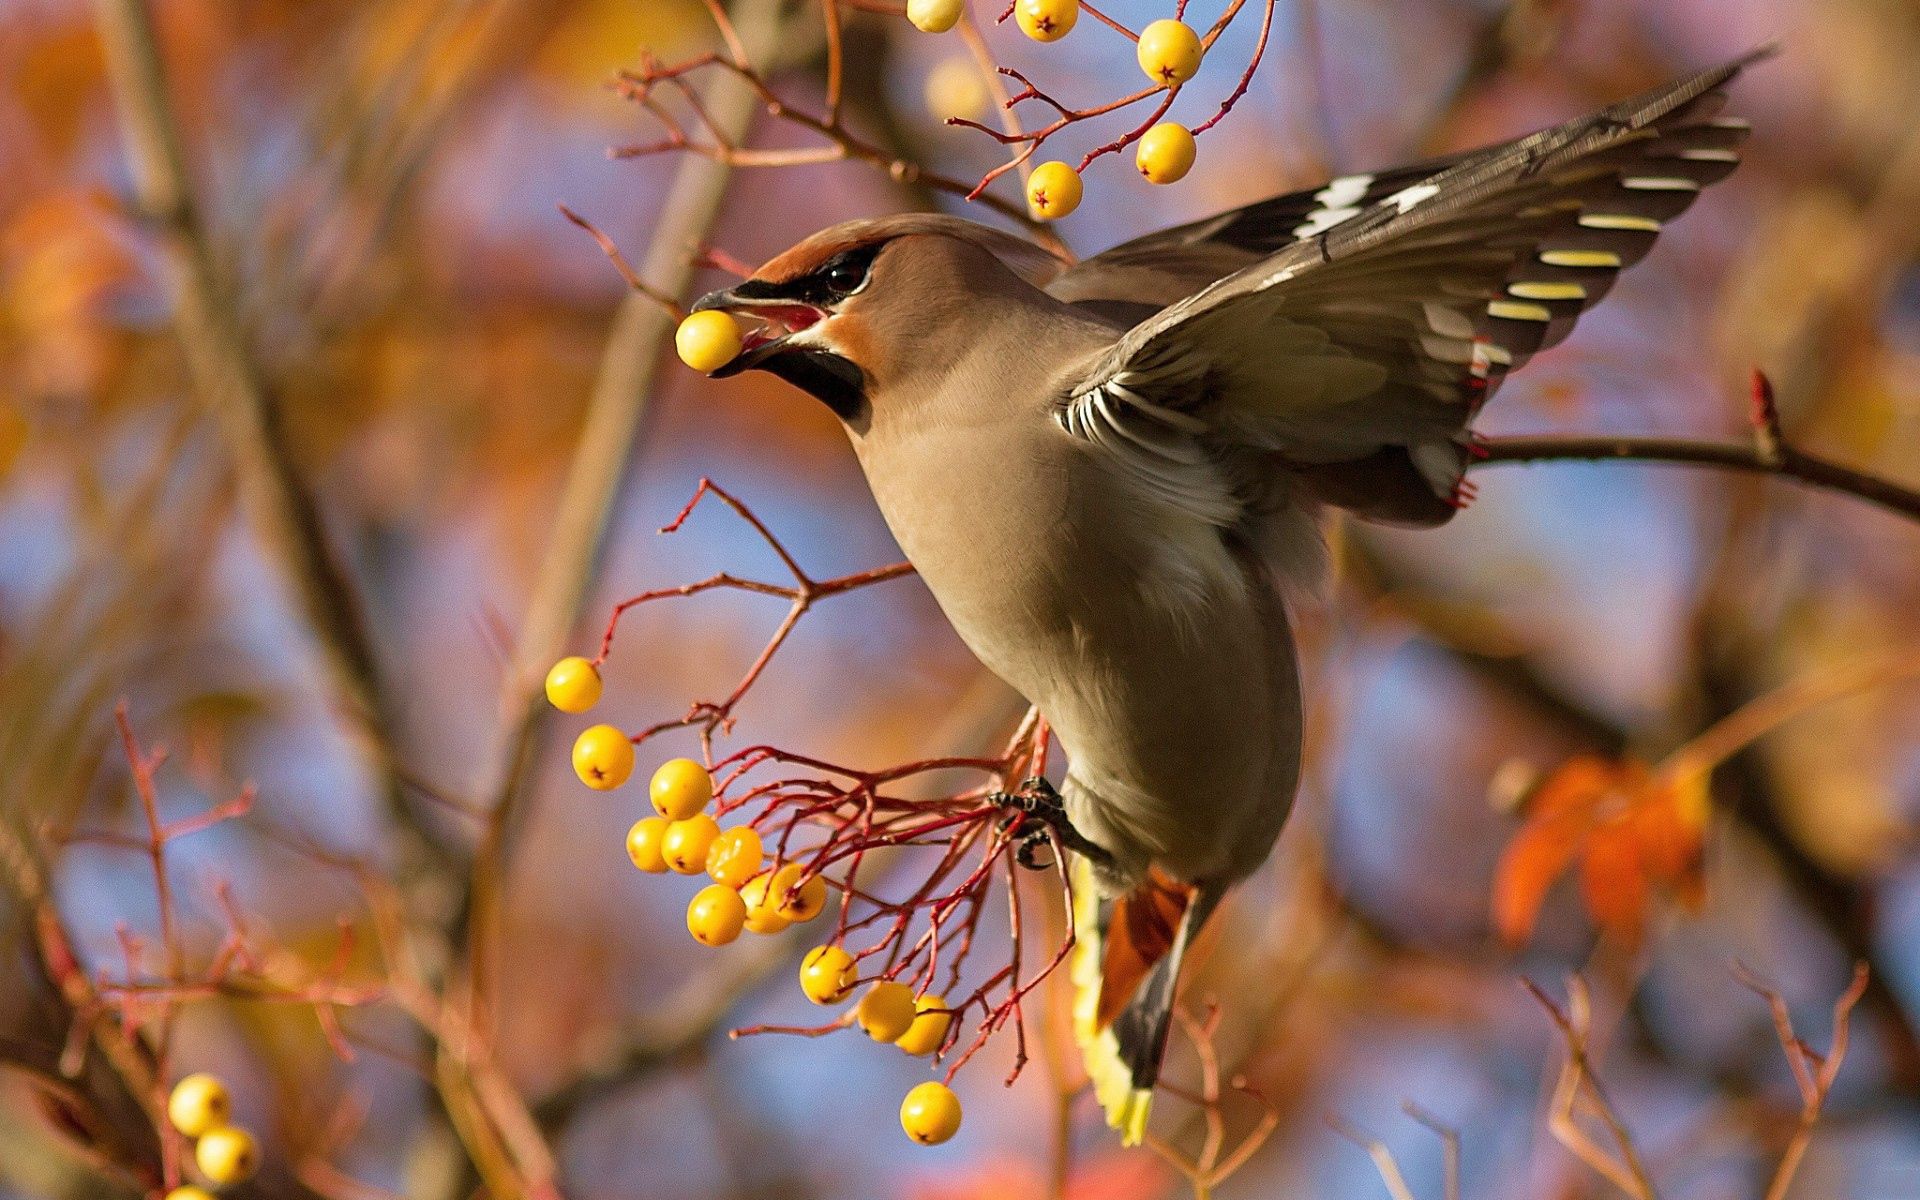 139627 download wallpaper bird, animals, berries, branch, waxwing screensavers and pictures for free